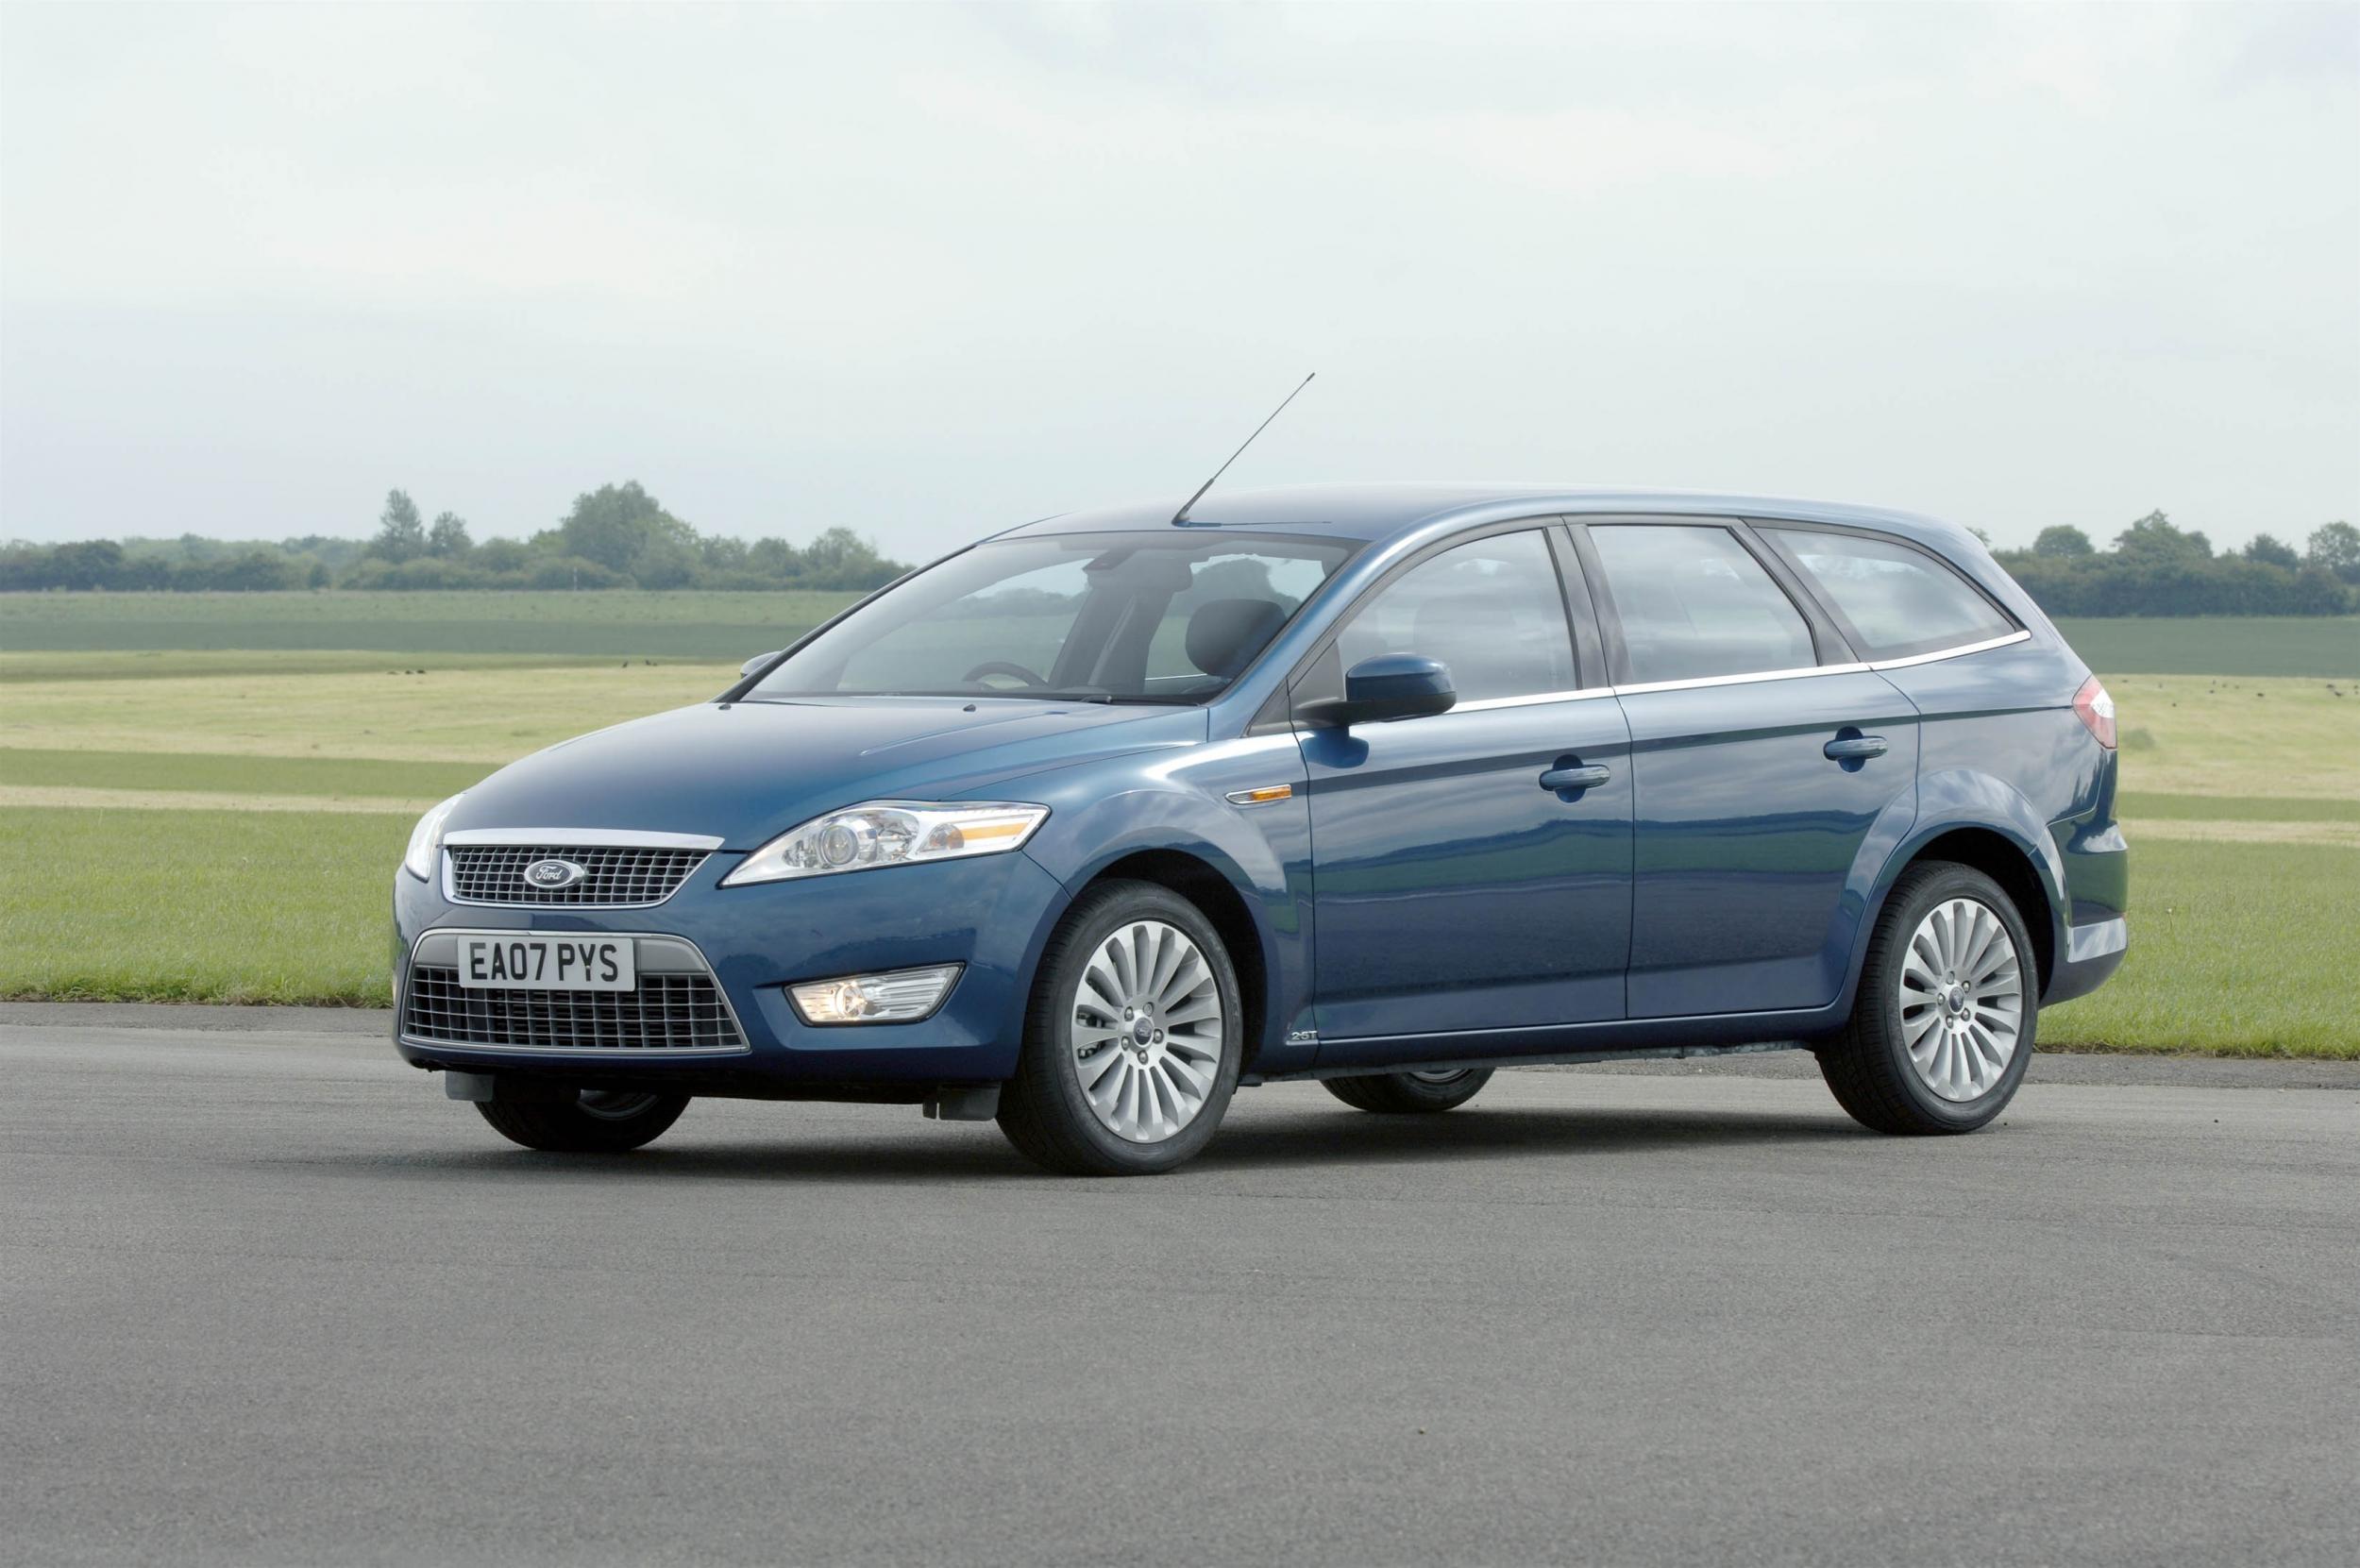 The Ford Mondeo estate has a large boot, perfect for dogs